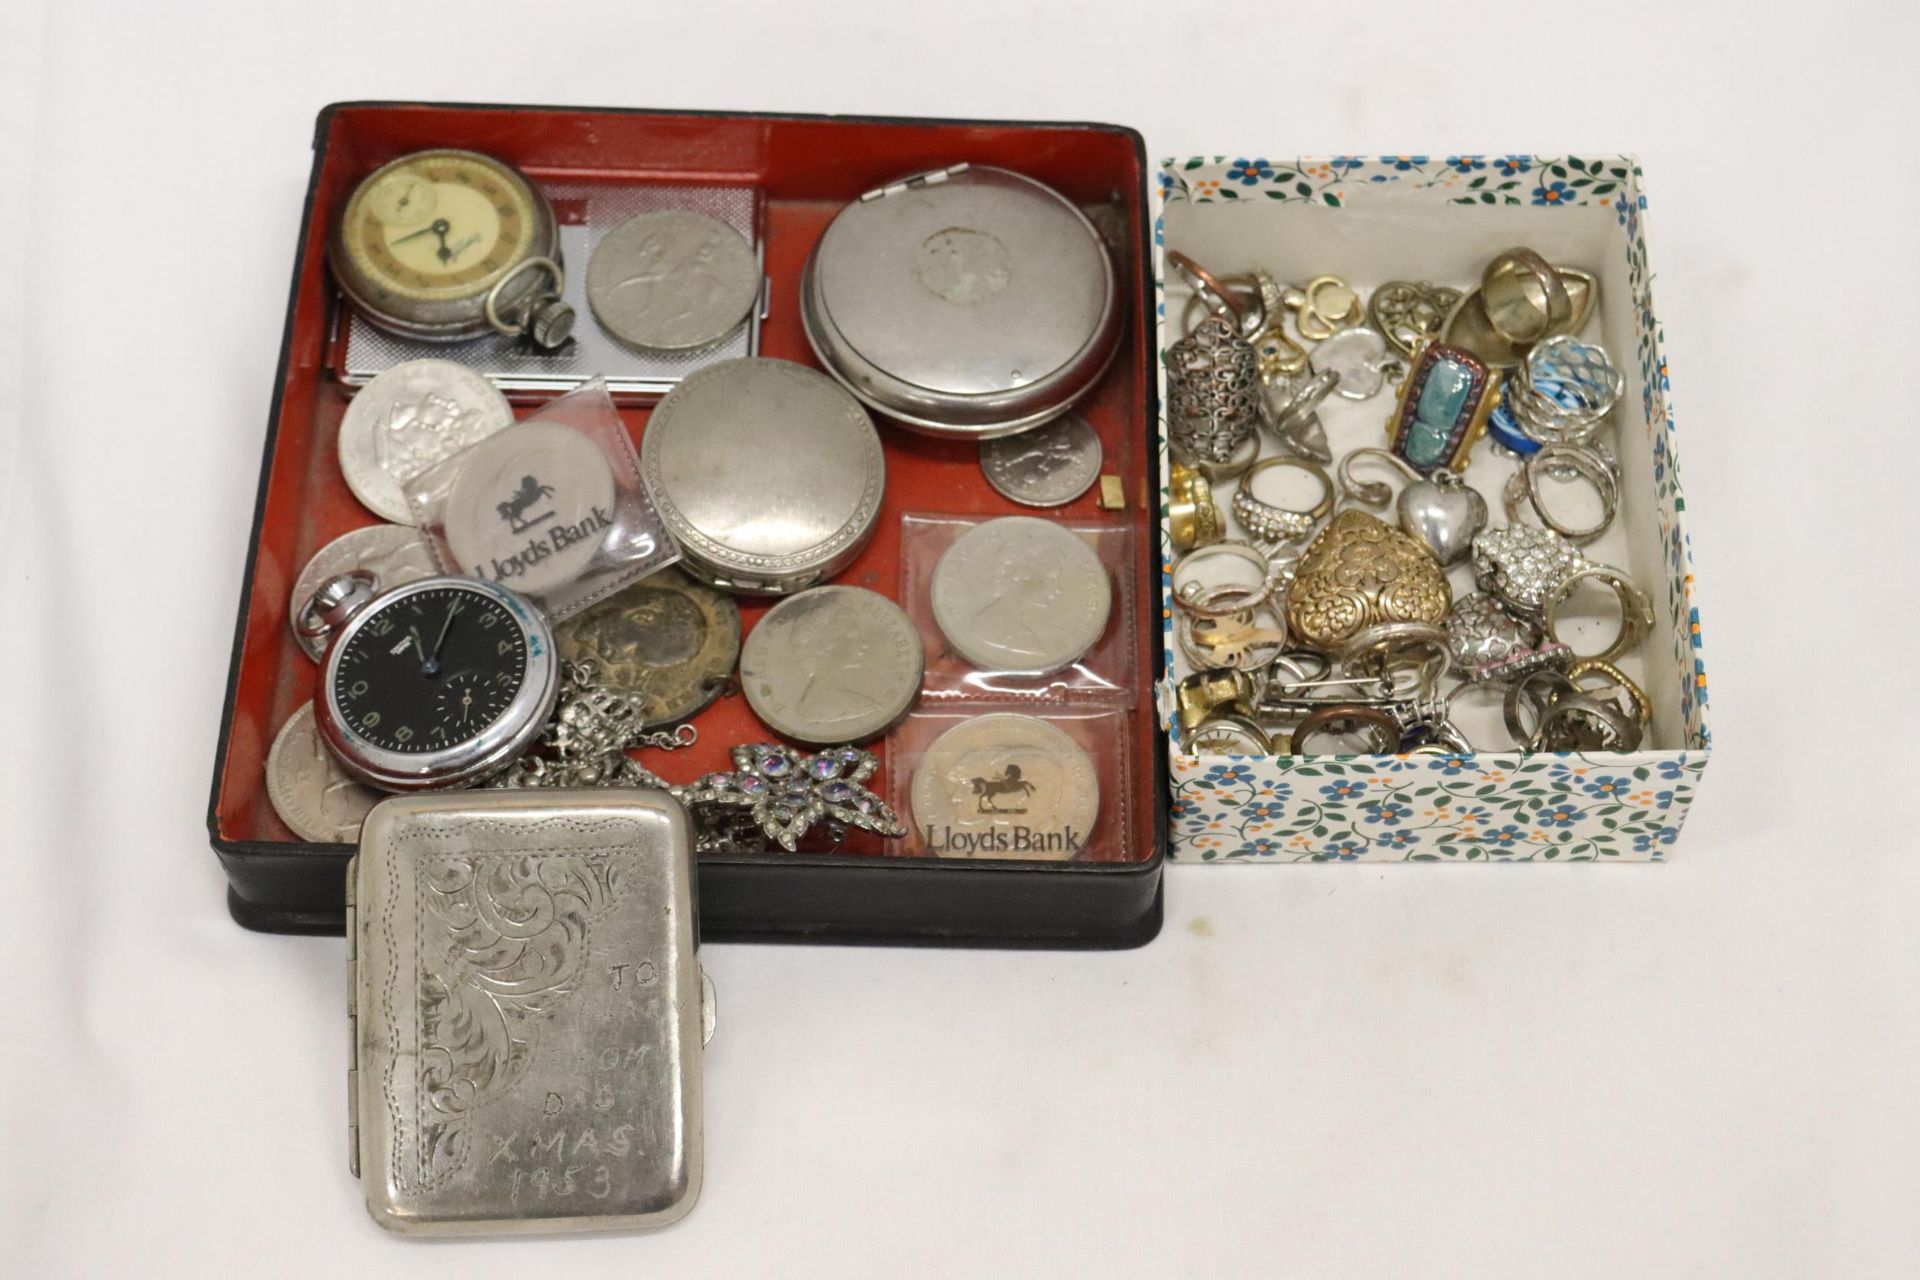 A QUANTITY OF COSTUME JEWELLERY TO INCLUDE POCKET WATCHES IN NEED OF REPAIR, RINGS, PENDANTS, COINS,